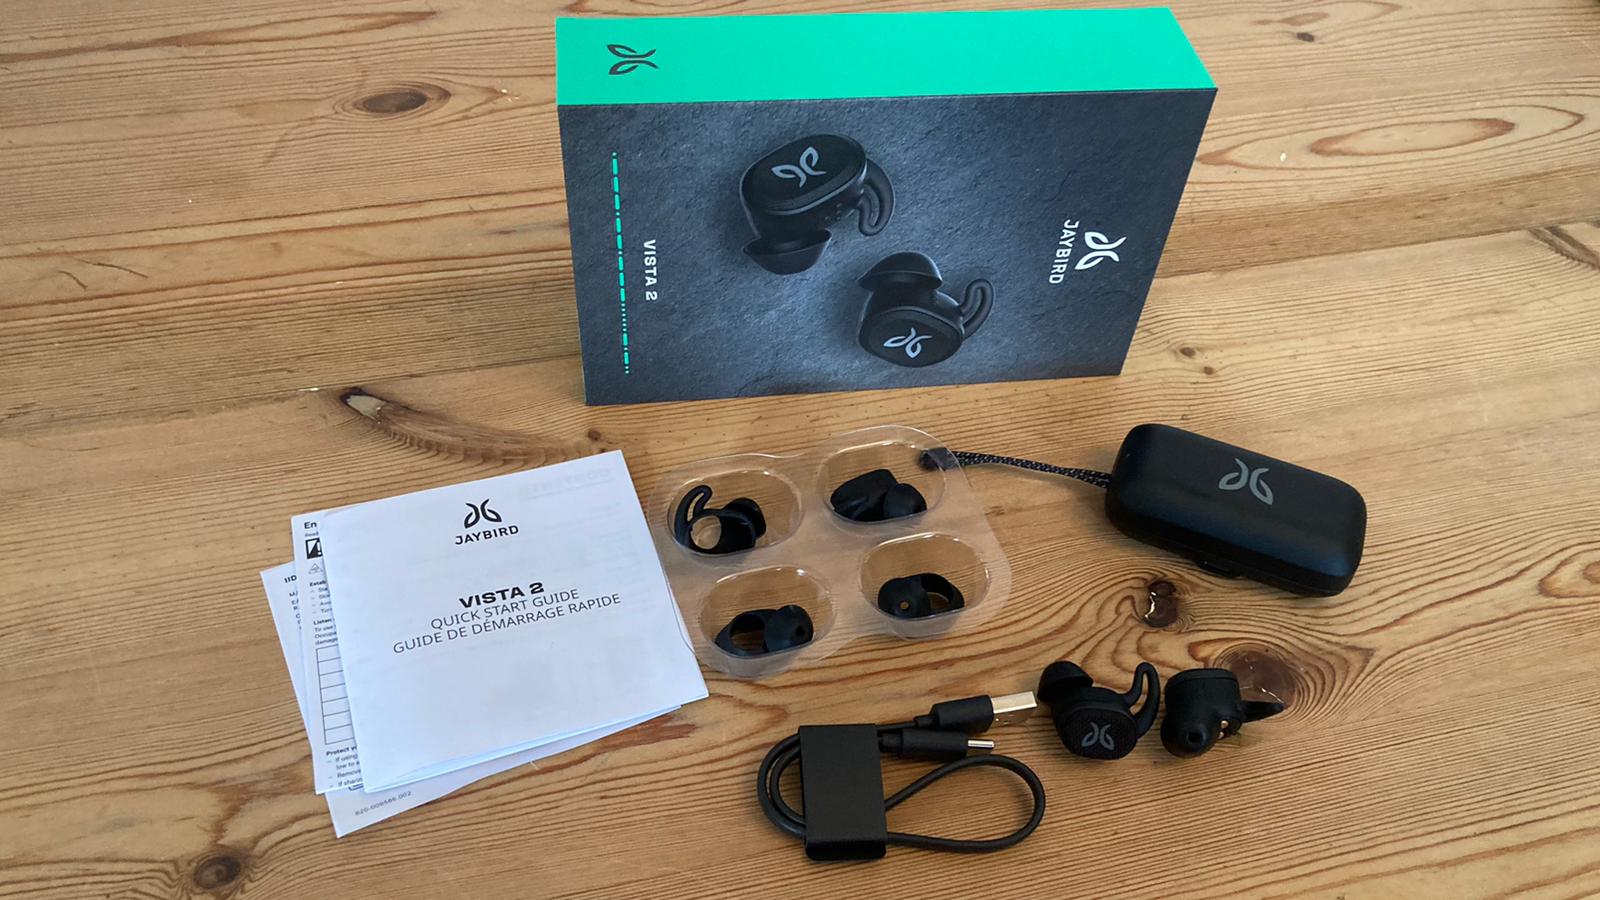 The Jaybird Vista 2 headphones tested by the Live Science team